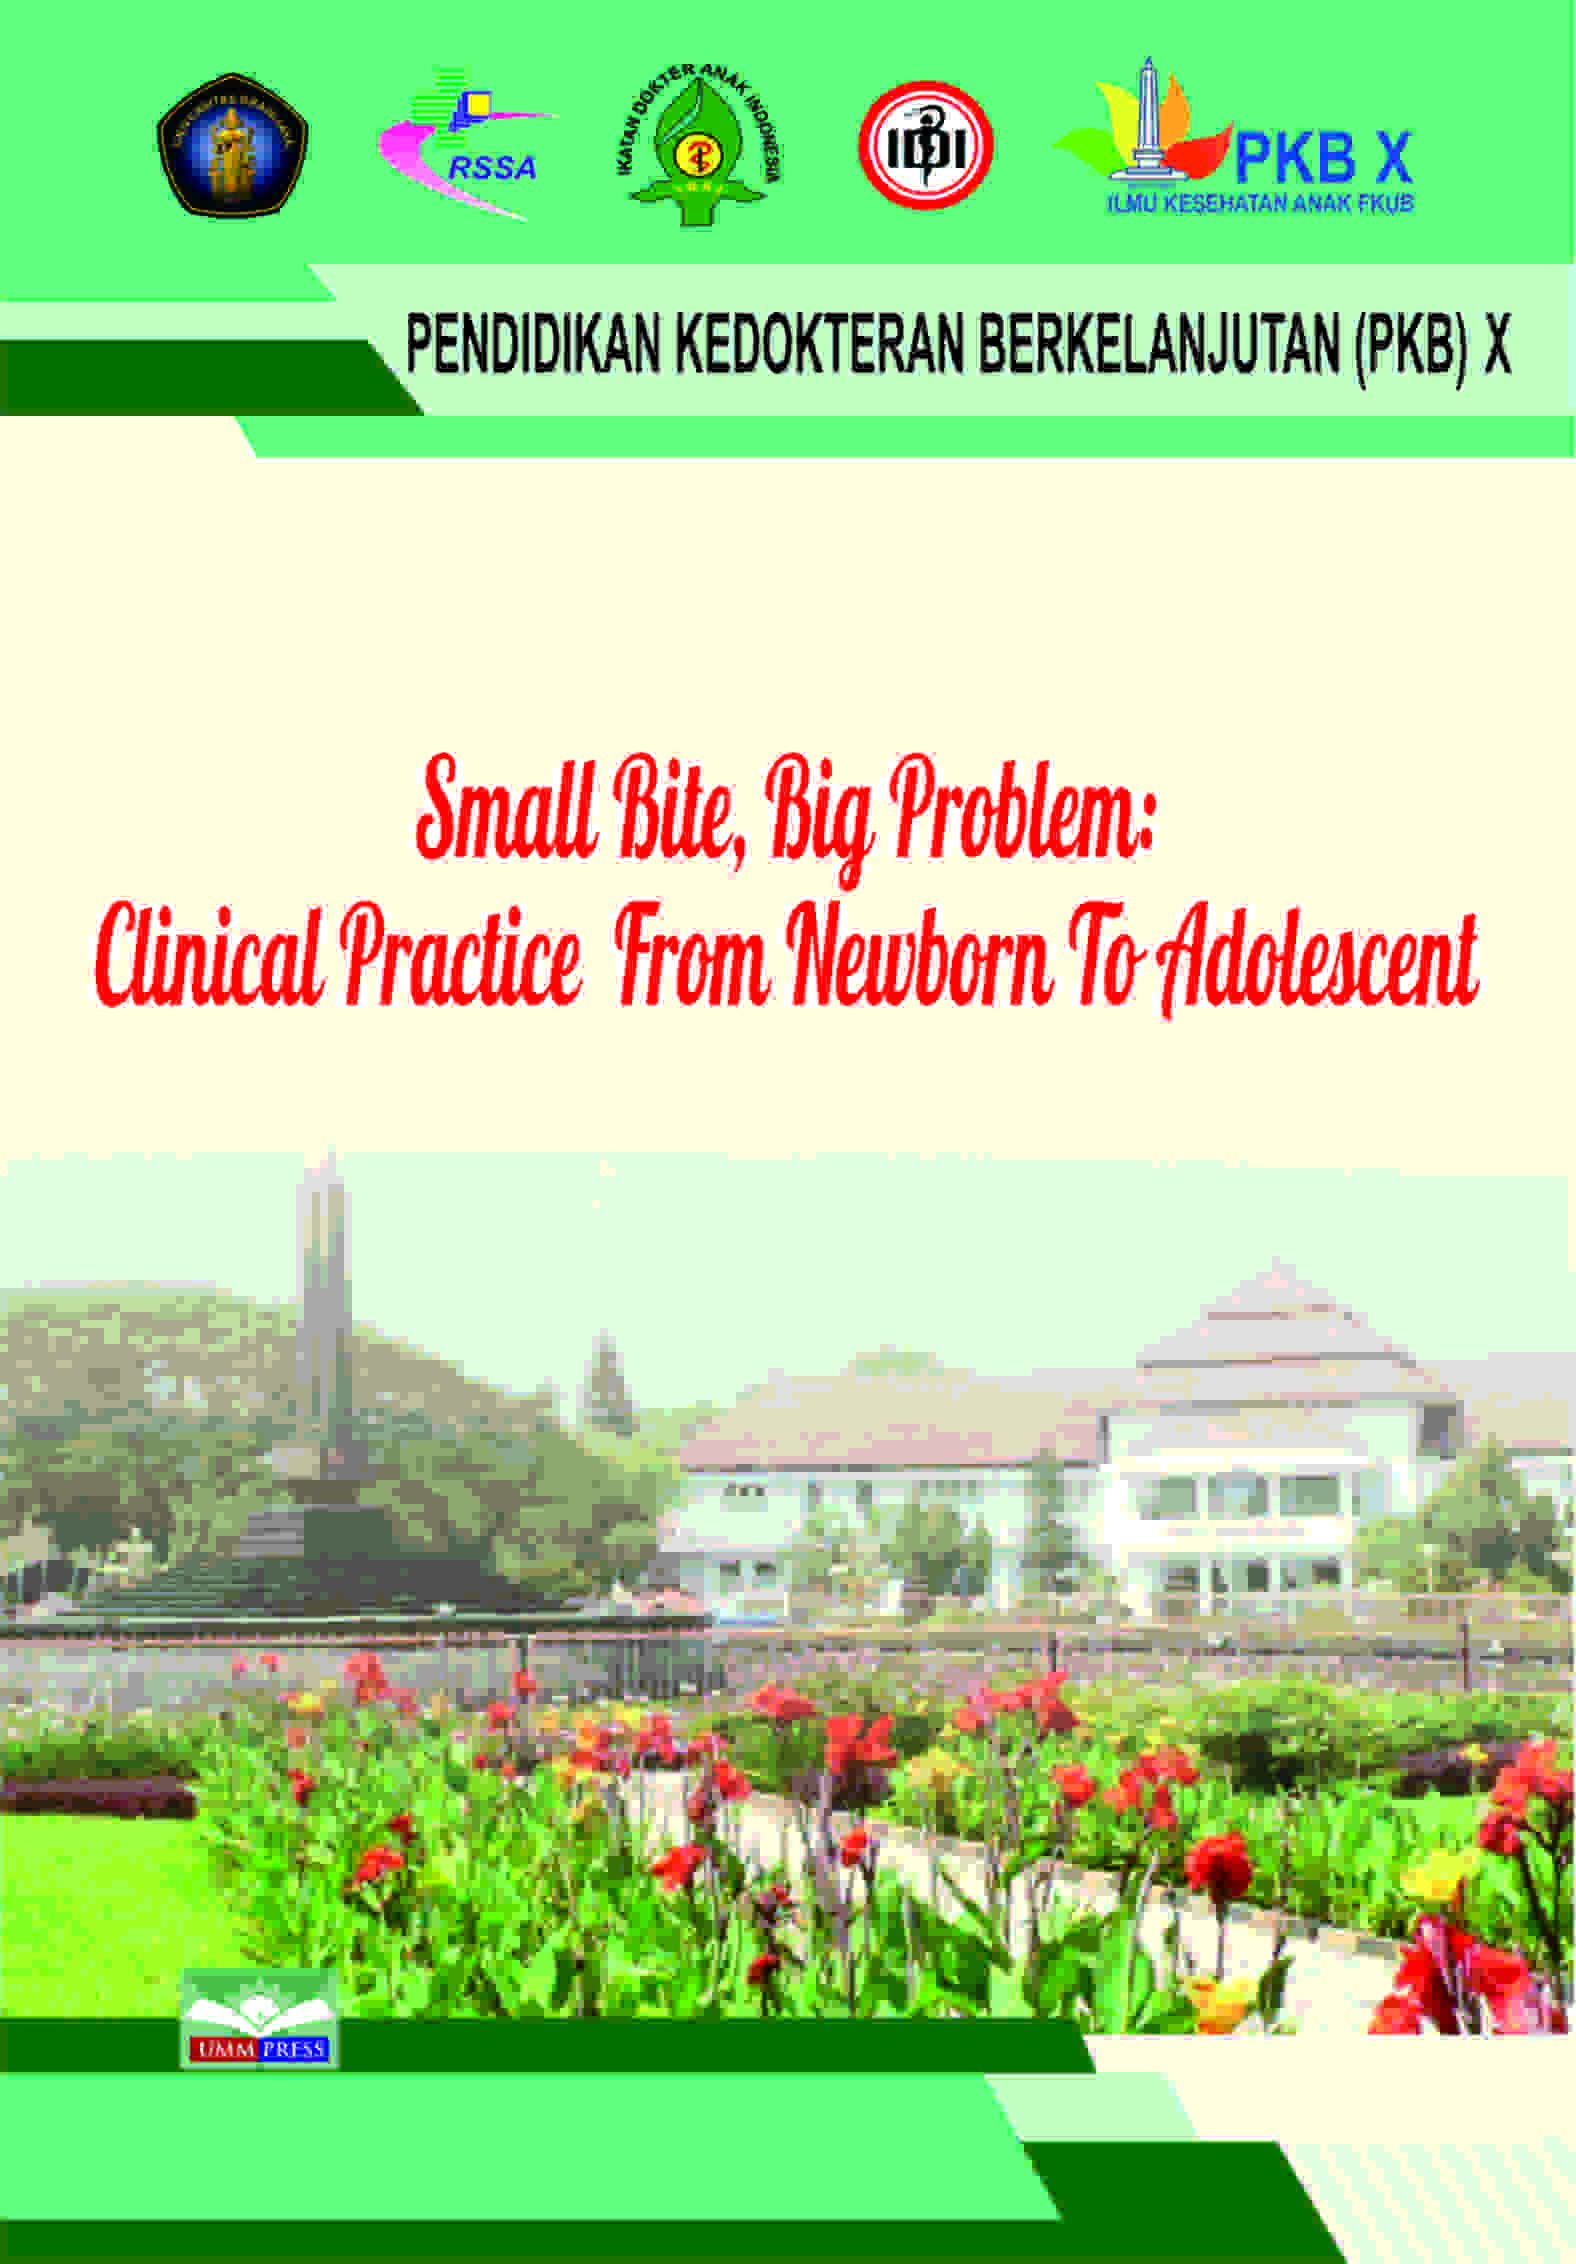 SMALL BITE BIG PROBLEM: CLINICAL PRACTICE FROM NEWBORN TO ADOLESCENT